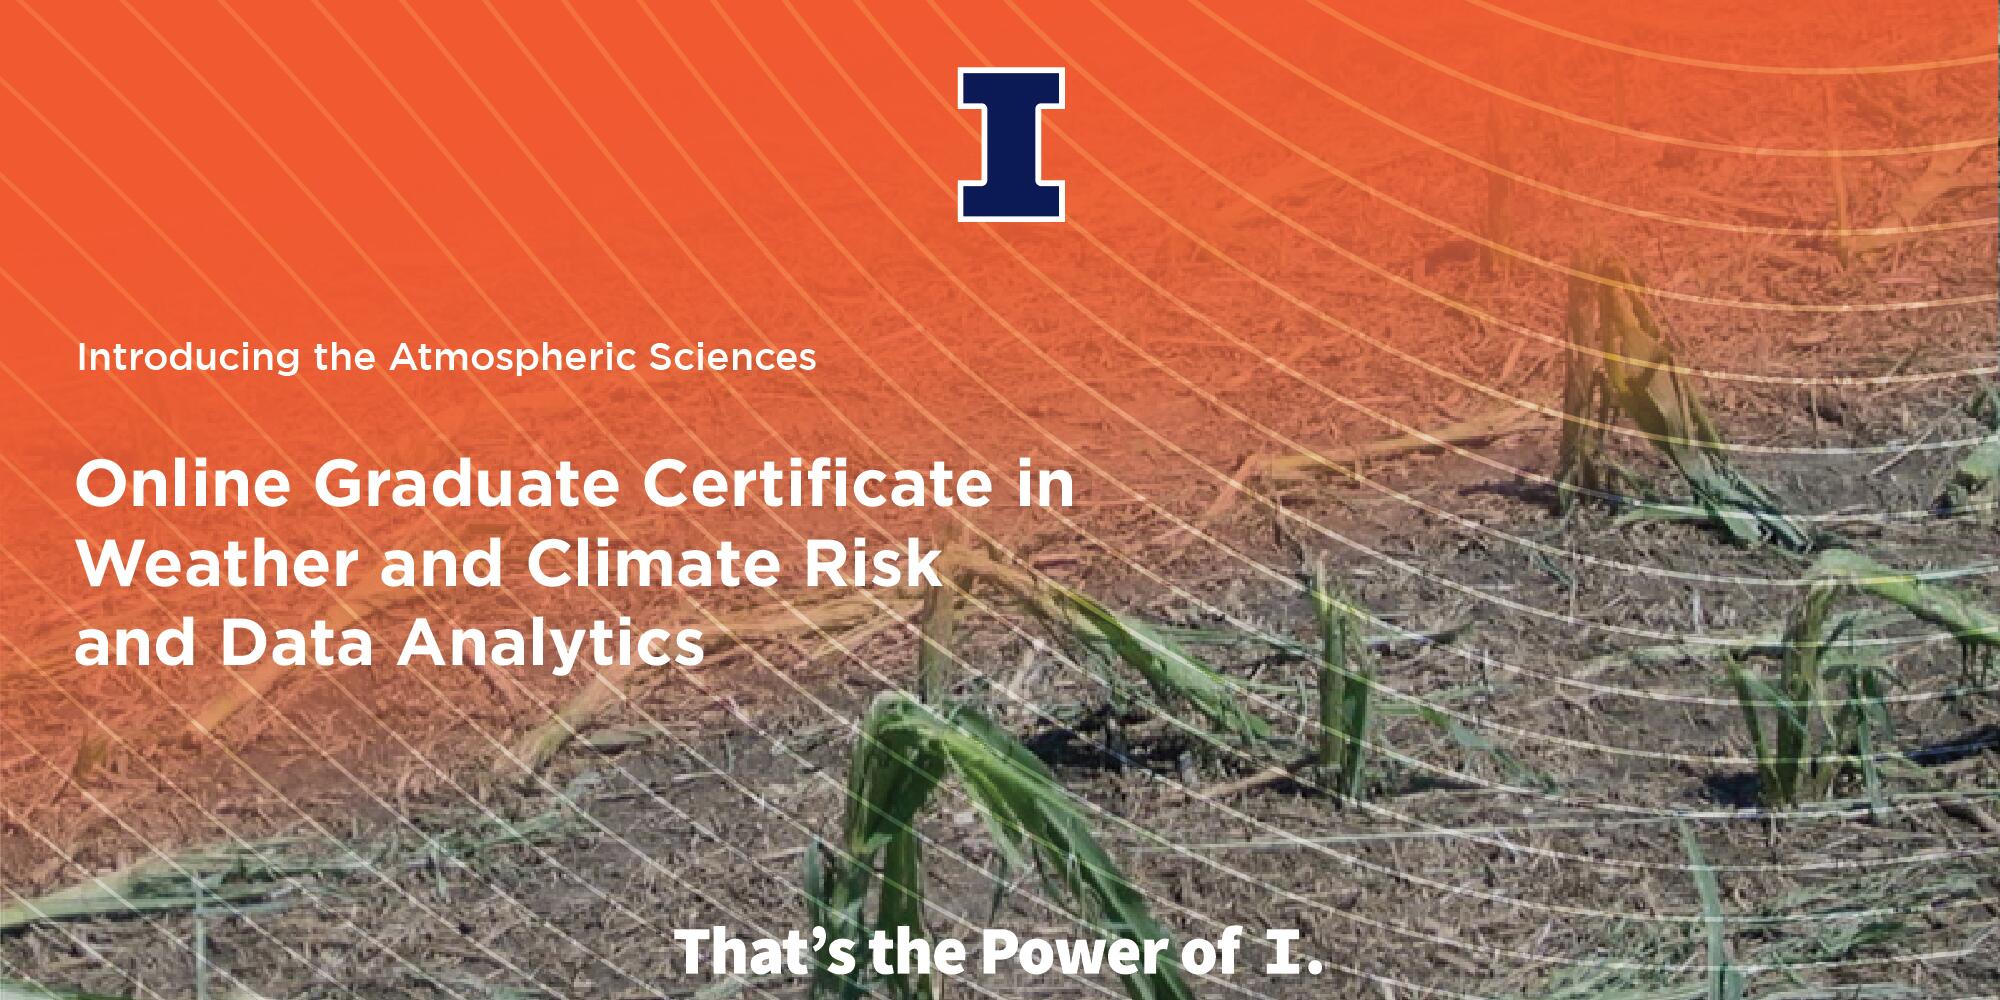 Online Graduate Certificate in Weather and Climate Risk and Data Analytics 